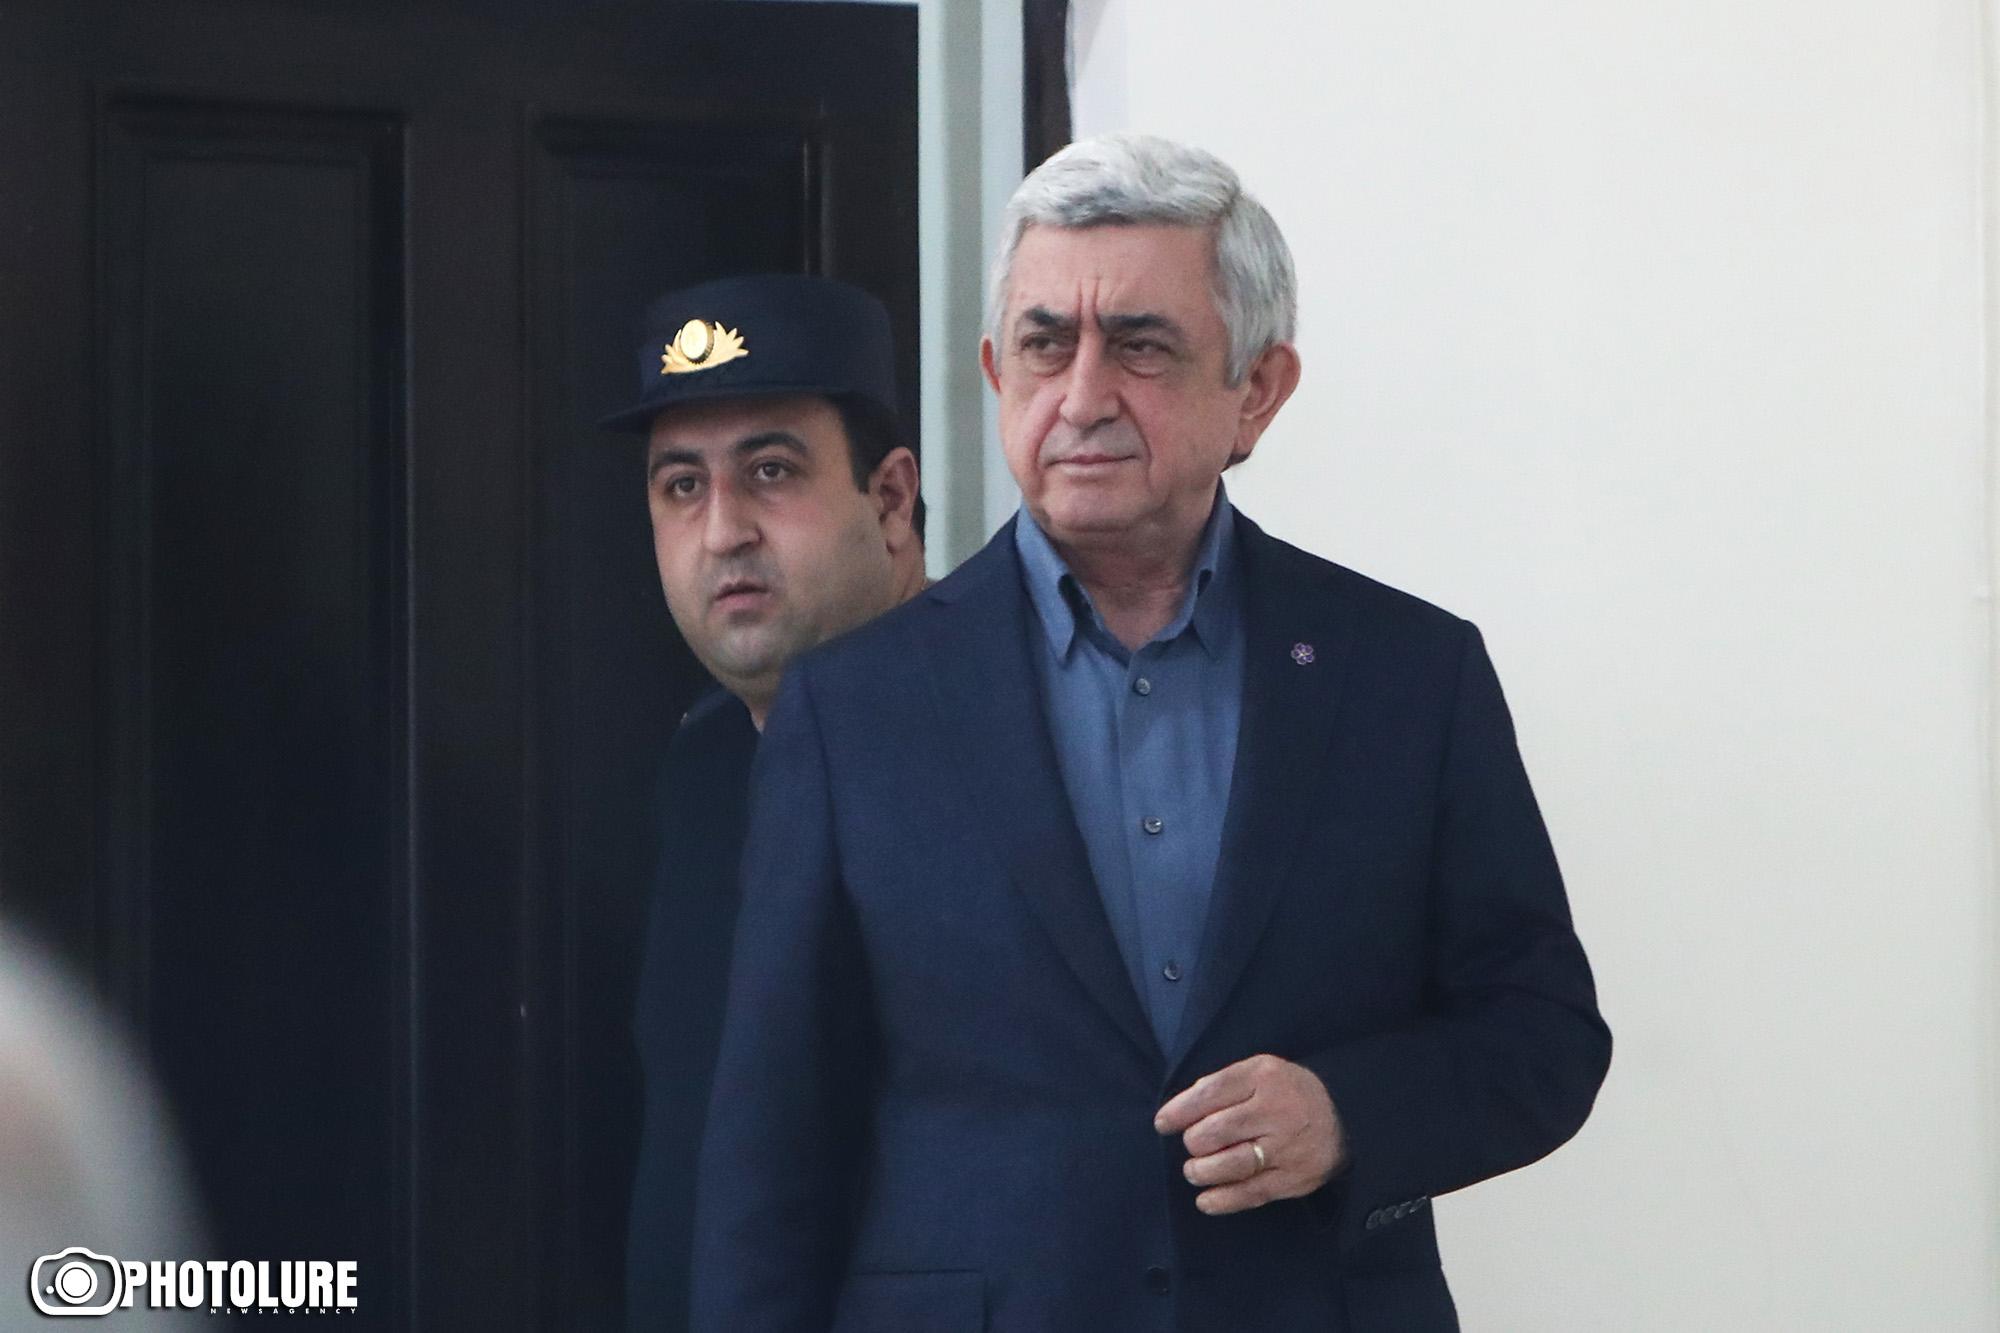 Two of Armenia’s Former Presidents Face Criminal Charges, as Trial Against Serzh Sargsyan Begins